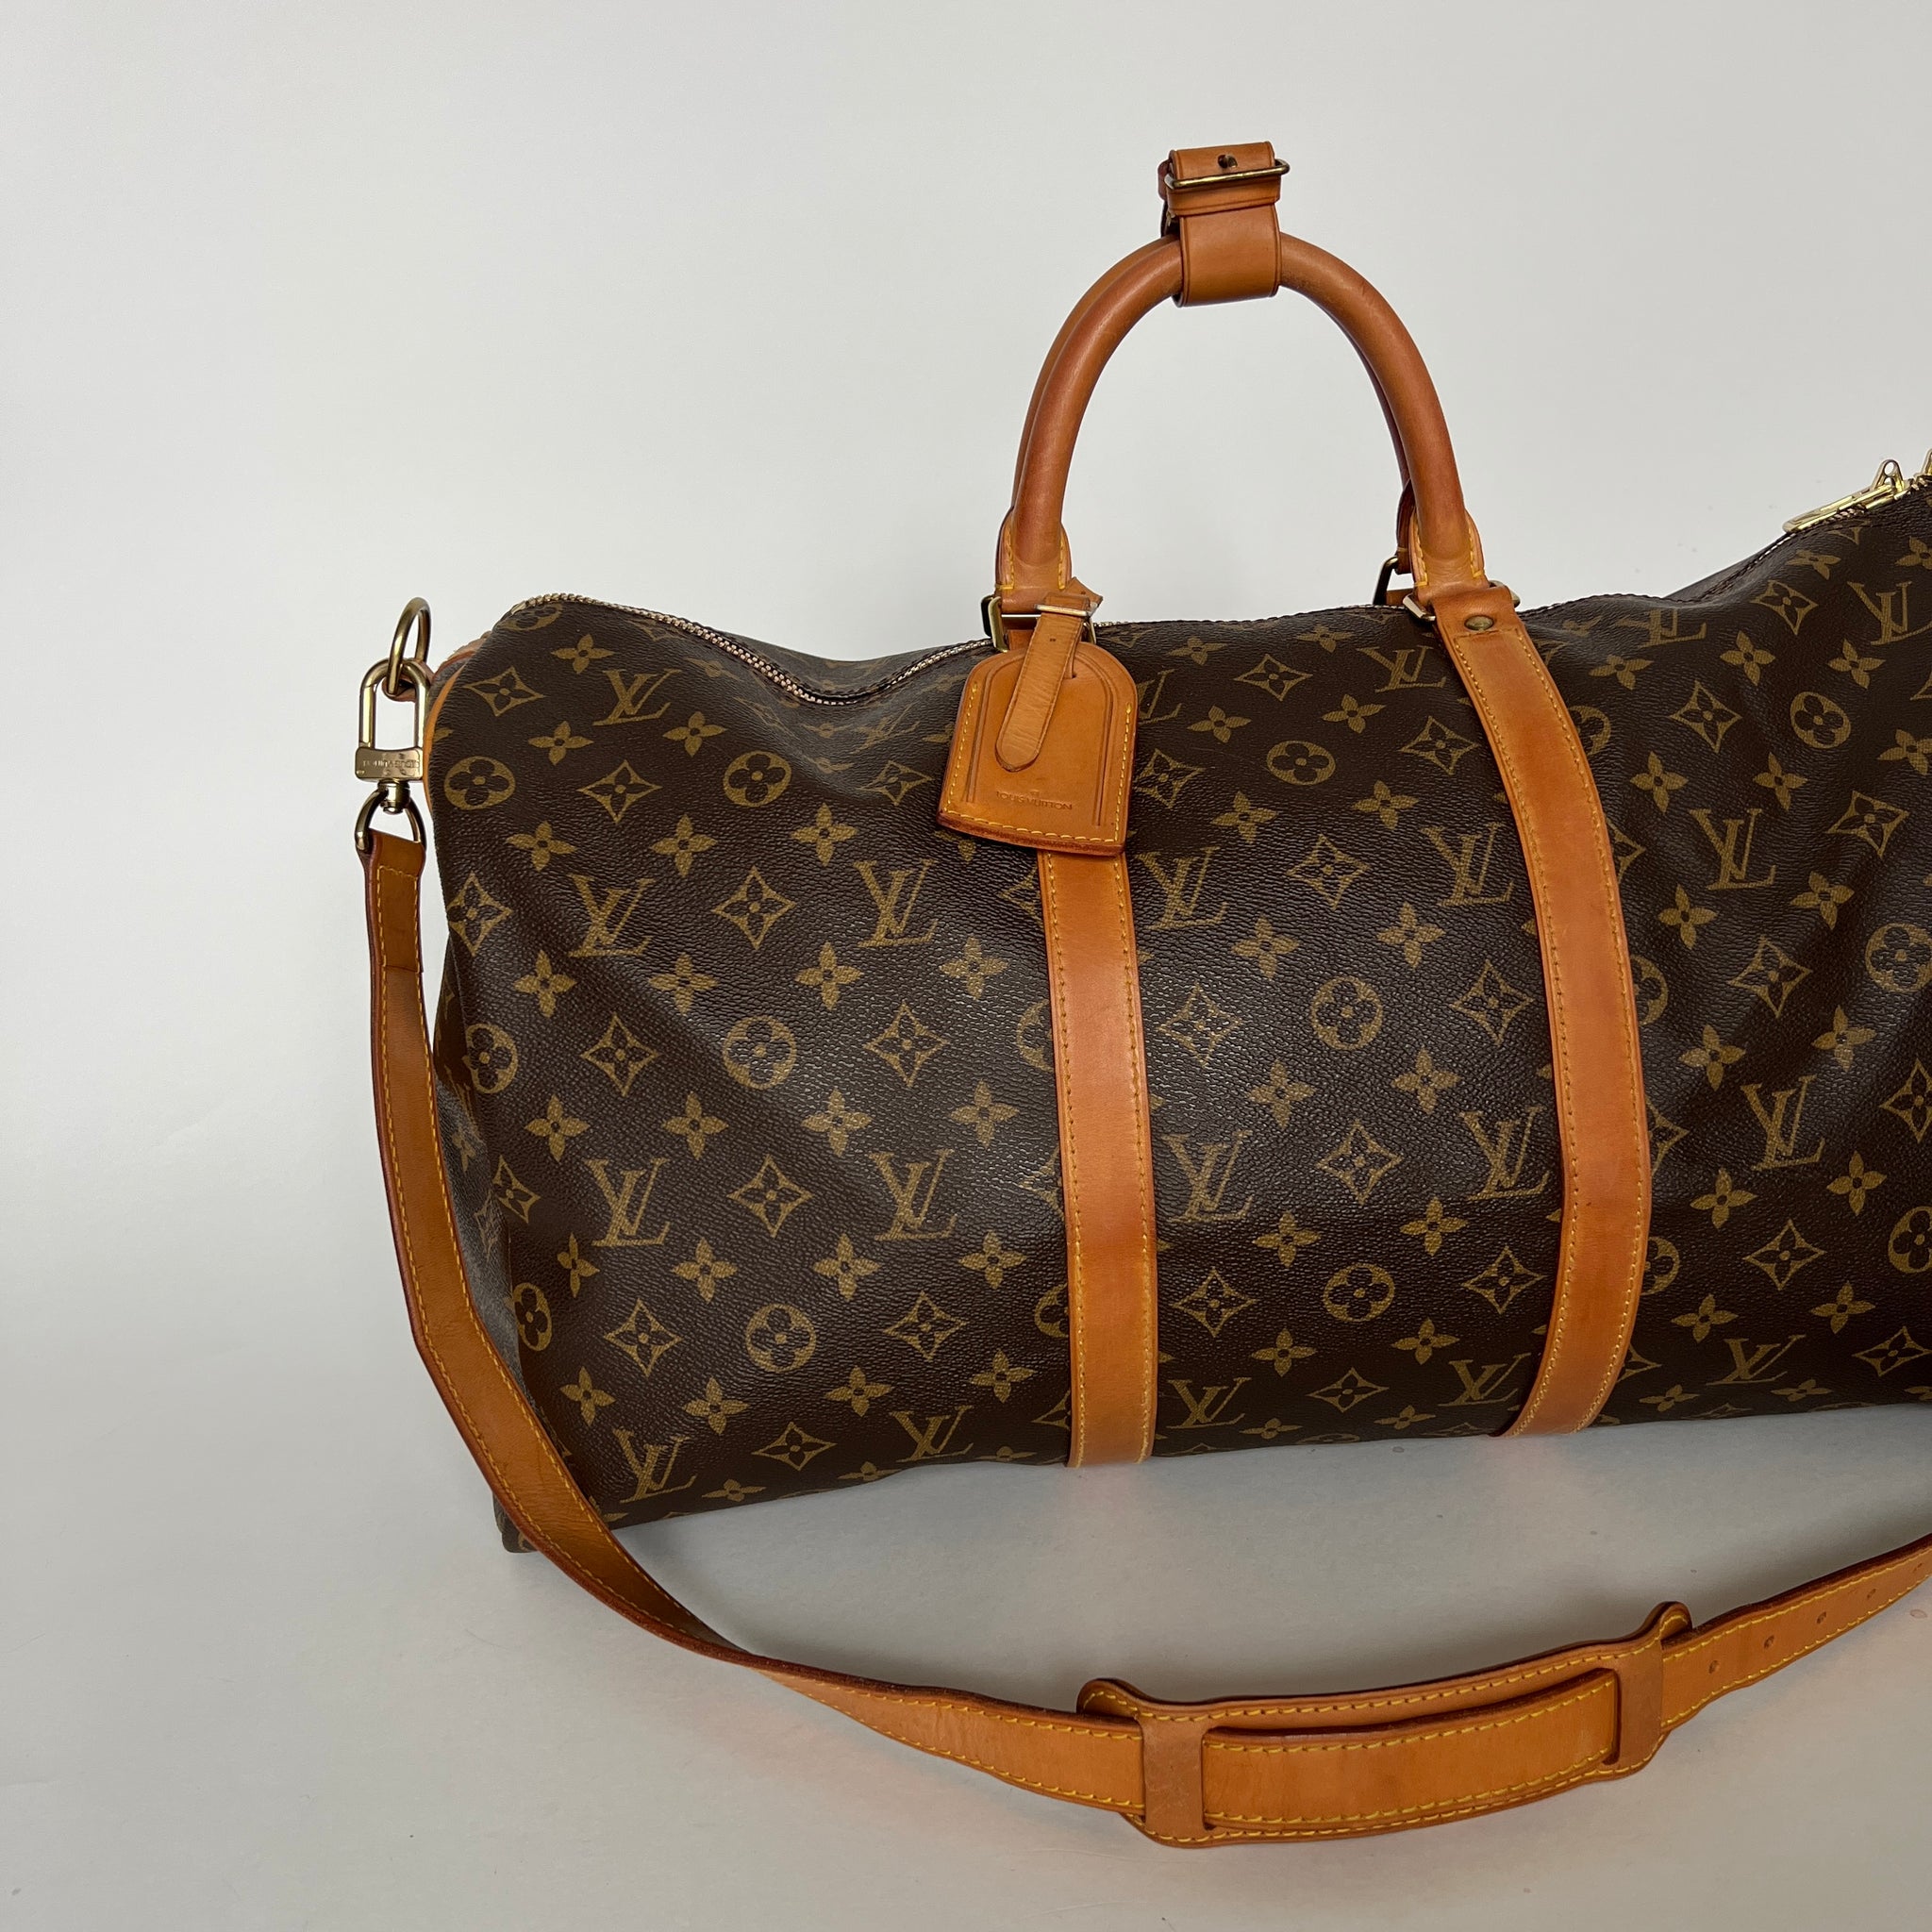 Authentic Louis Vuitton Keepall Duffle Bag for Sale in Irving, TX